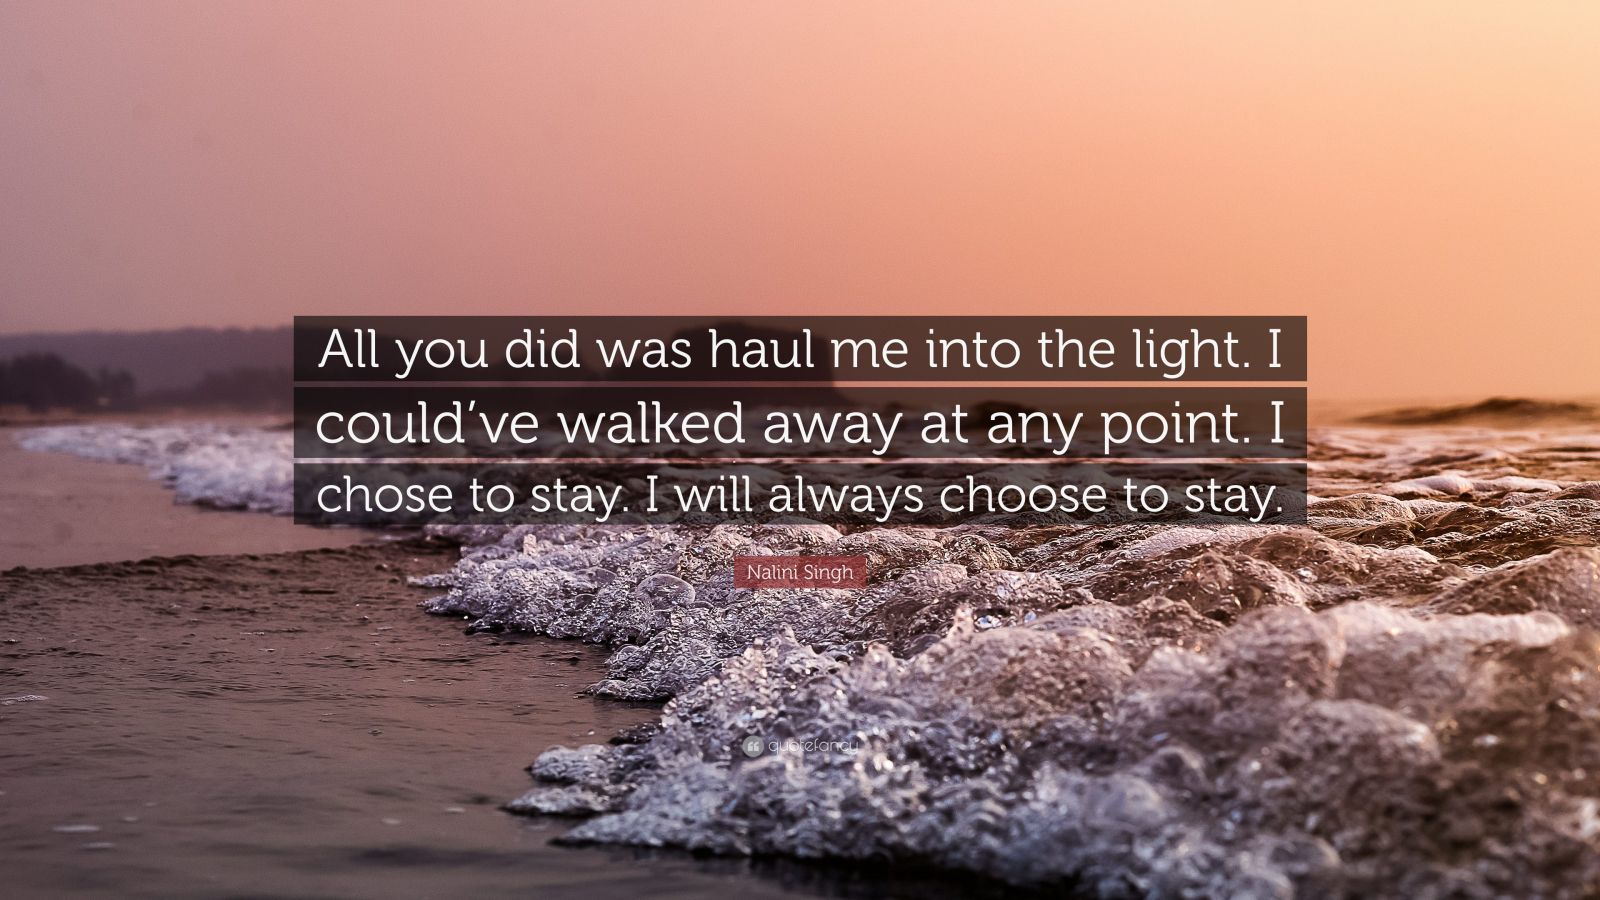 Nalini Singh Quote: “All you did was haul me into the light. I